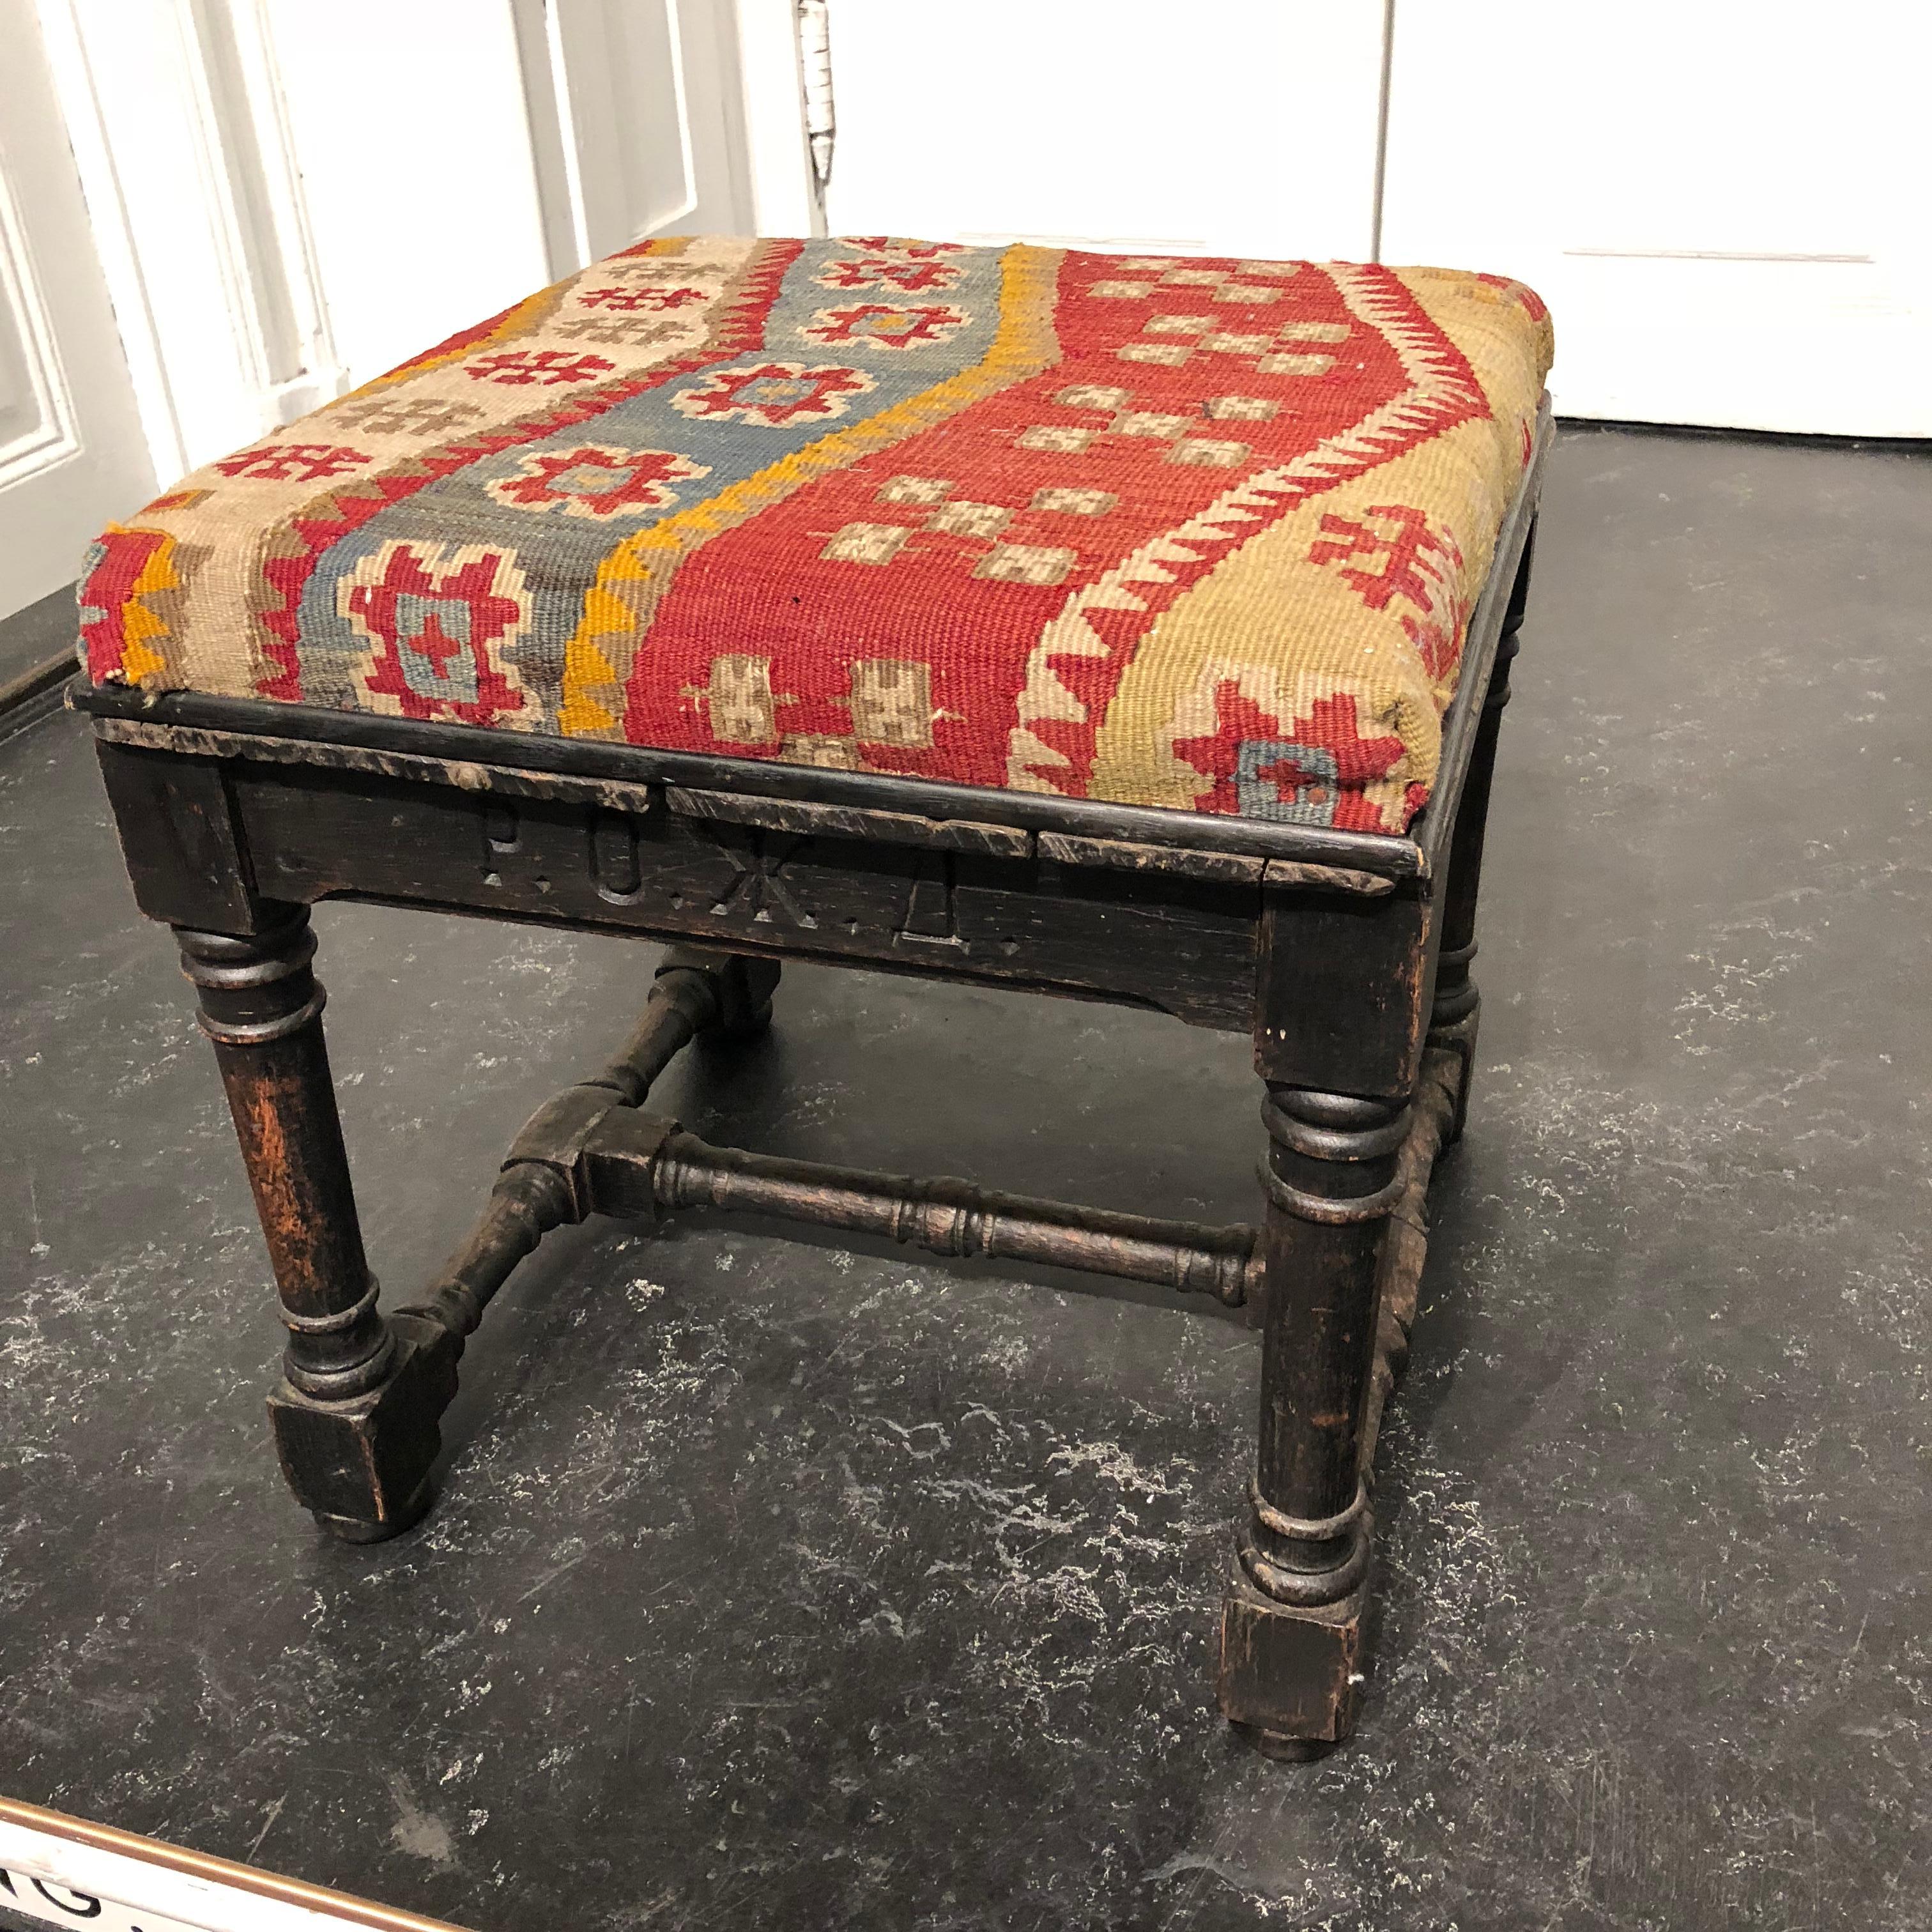 Early 19th Century Antique Russian Stool Or Ottoman Pouf 4